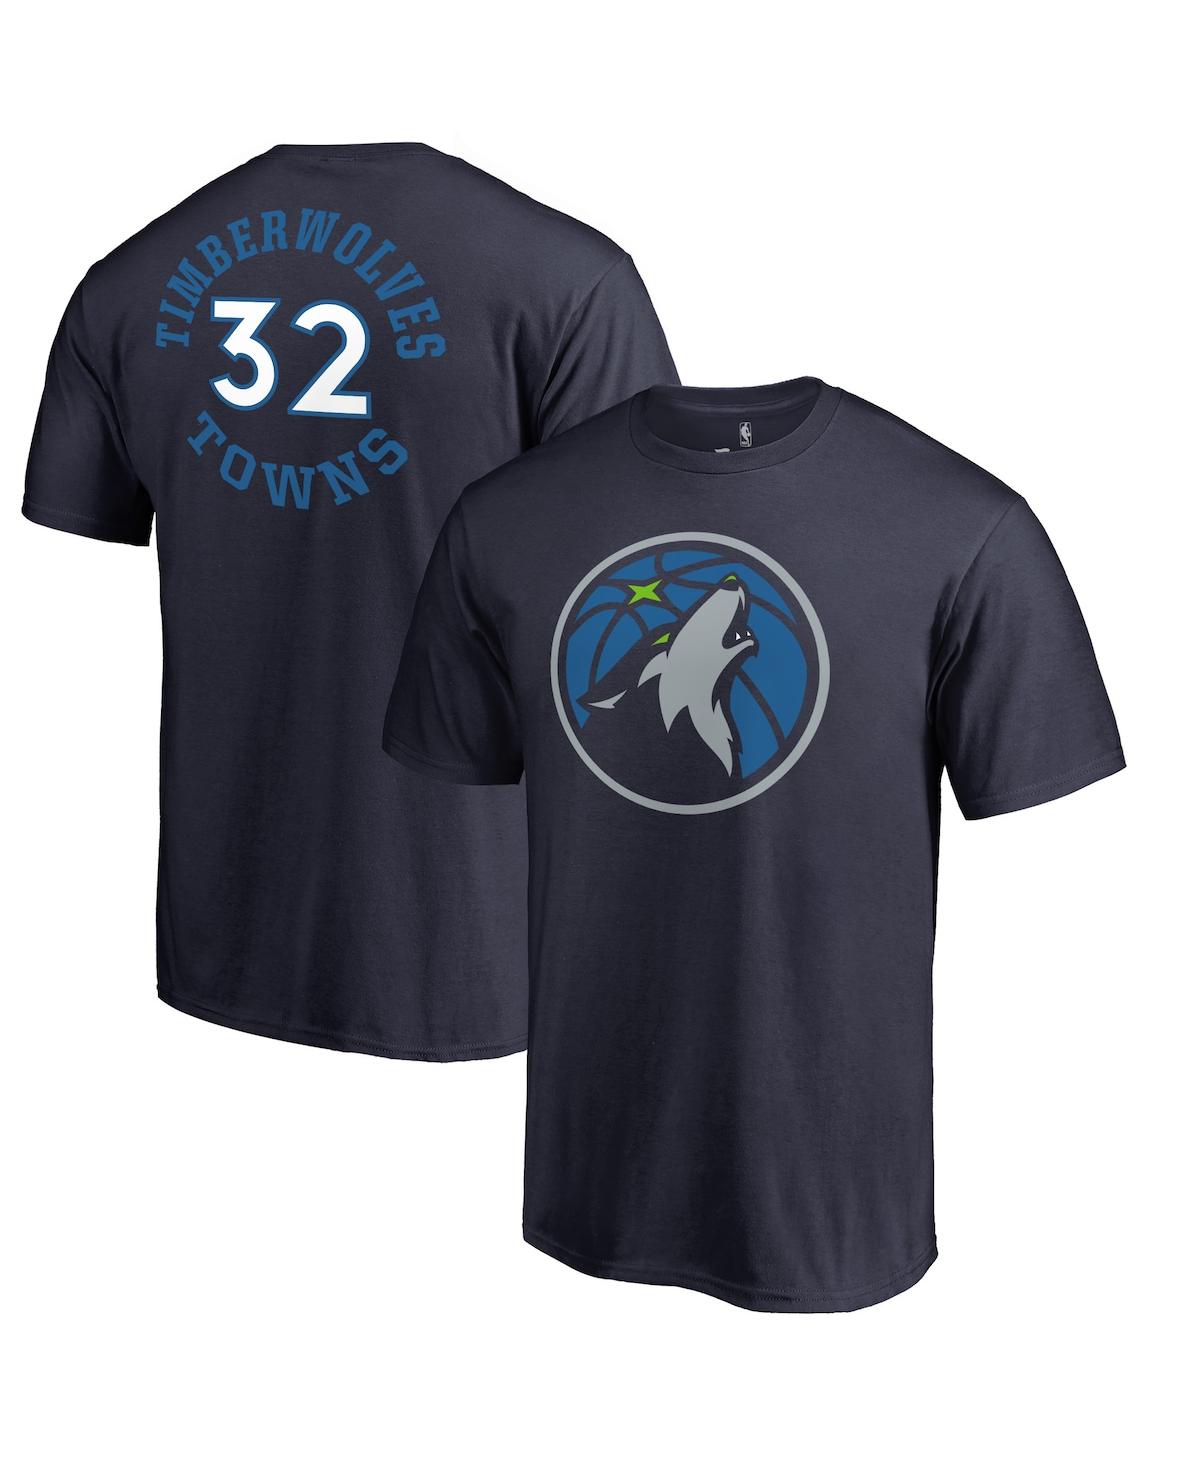 FANATICS MEN'S FANATICS KARL-ANTHONY TOWNS NAVY MINNESOTA TIMBERWOLVES ROUND ABOUT NAME AND NUMBER T-SHIRT